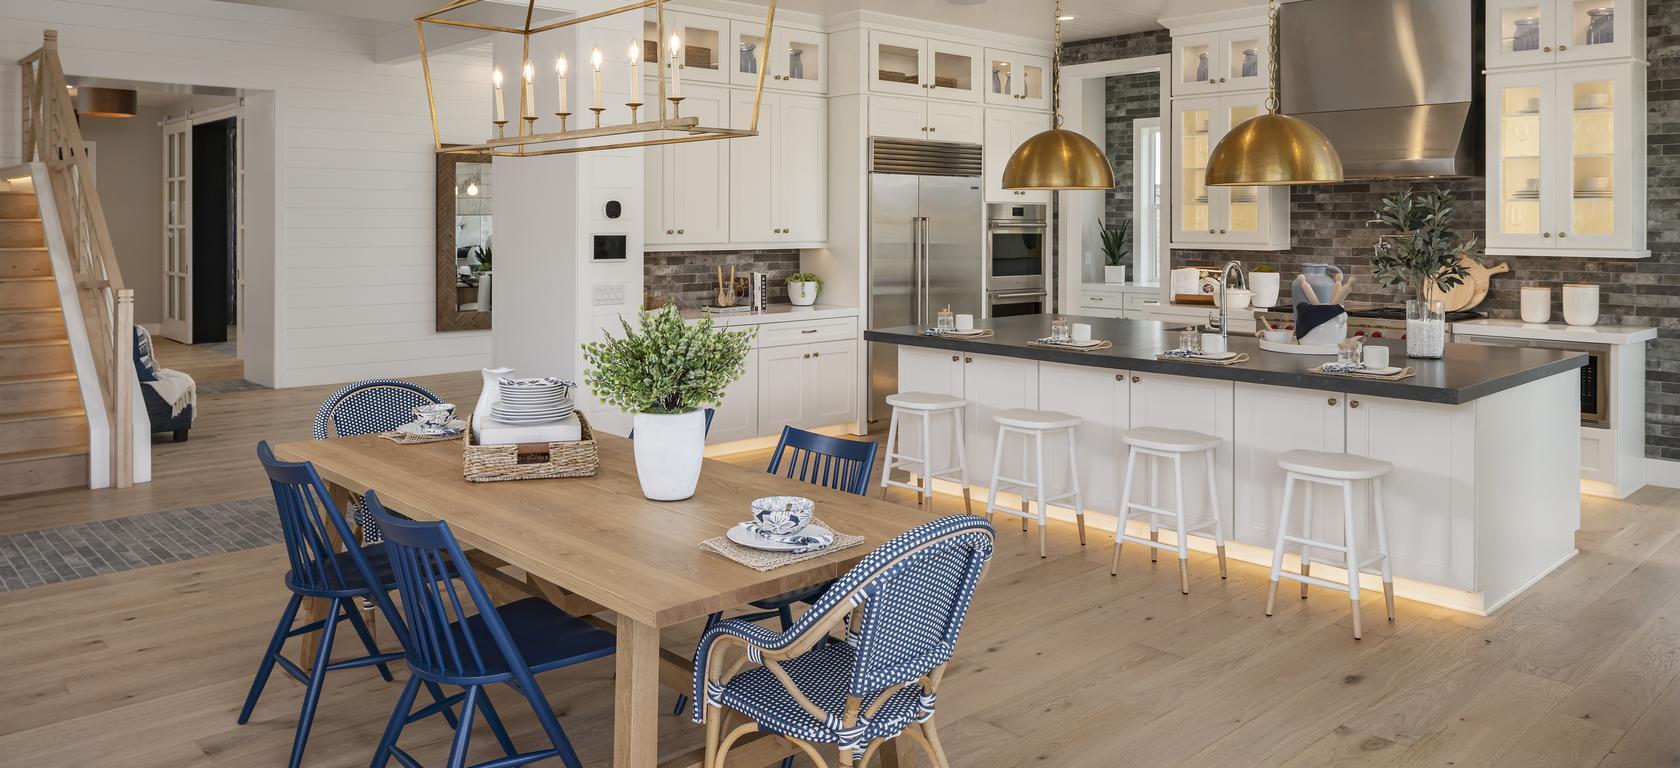 Kitchen with blue wicker chairs and center island with toe kick lighting